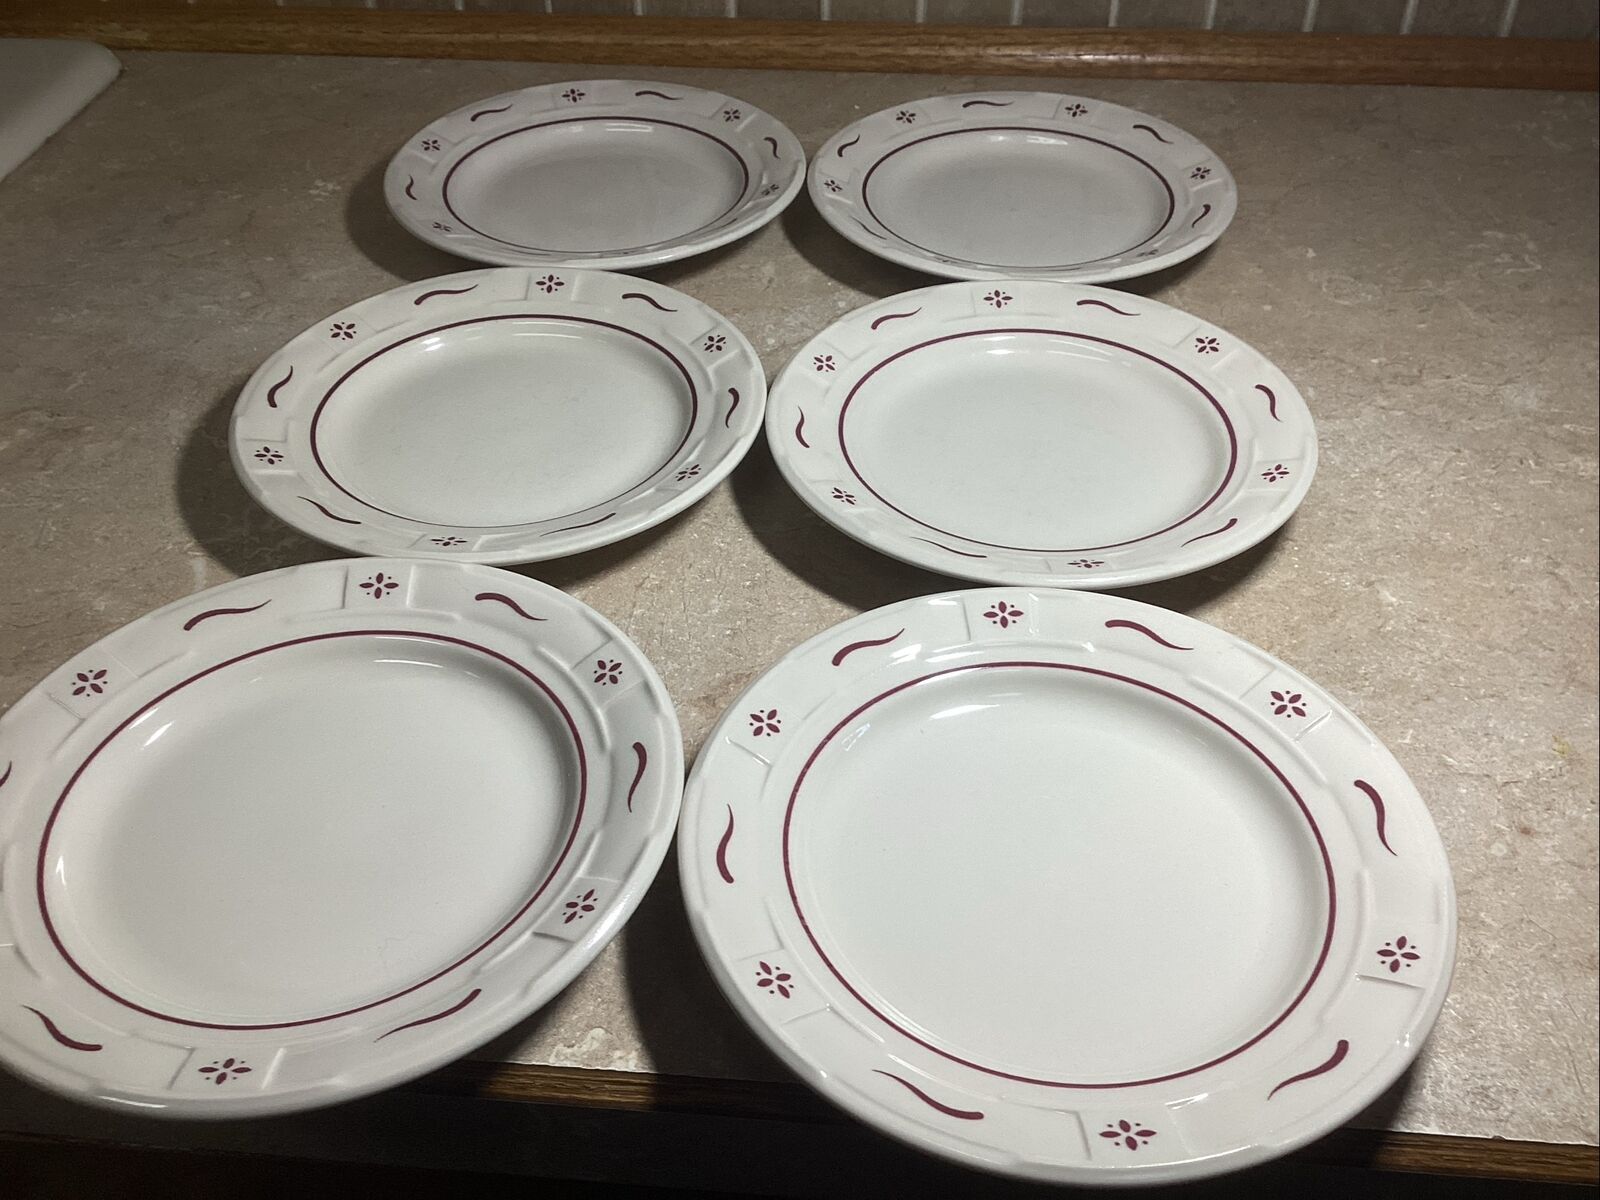 6 Longaberger Pottery Woven Heritage Red Trim 7 1/4” Plates USA